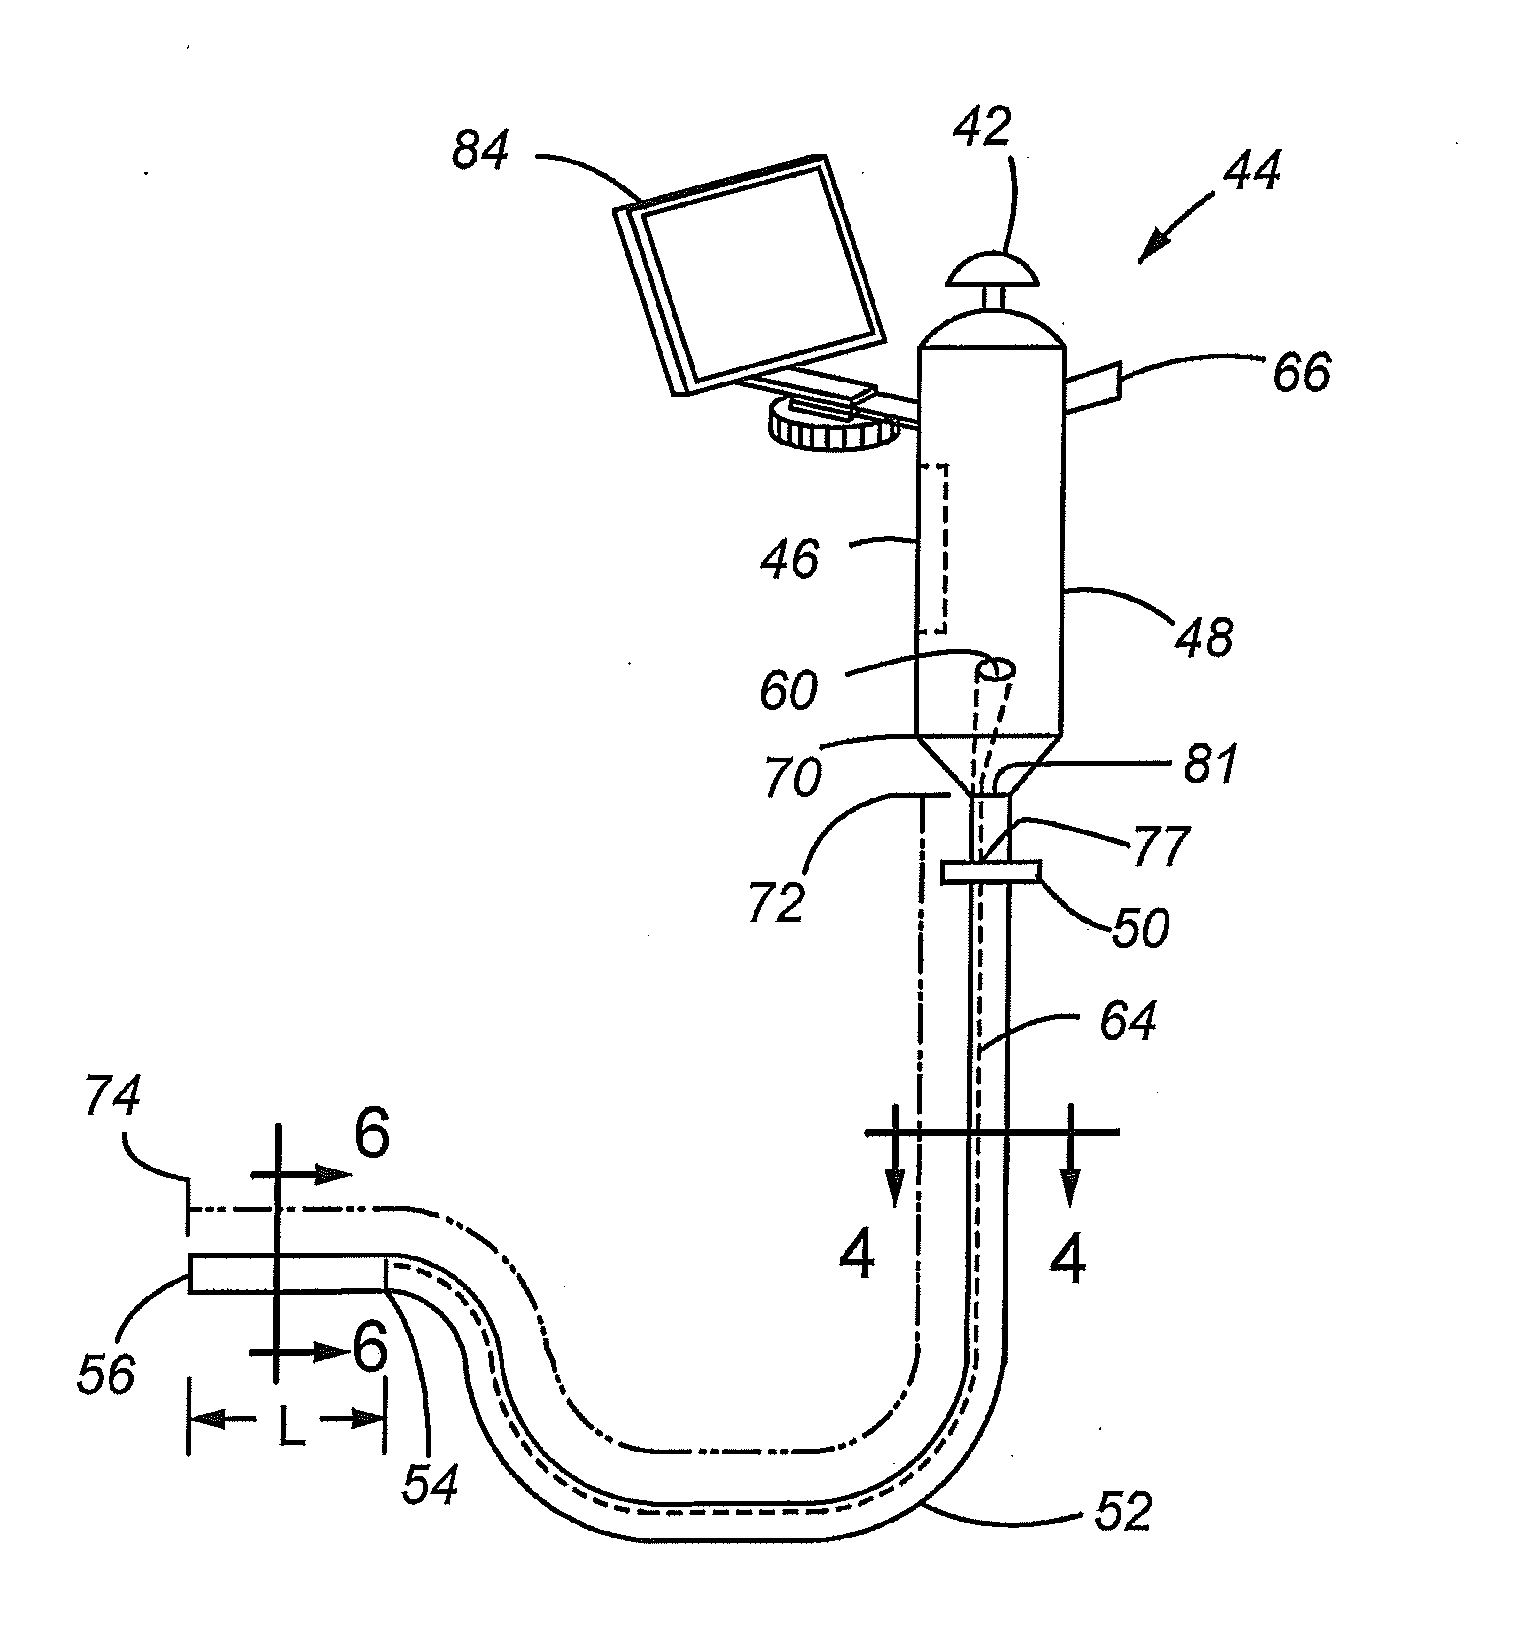 Self-cleaning wireless video stylet with display mounted to laryngoscope blade and method for using the same